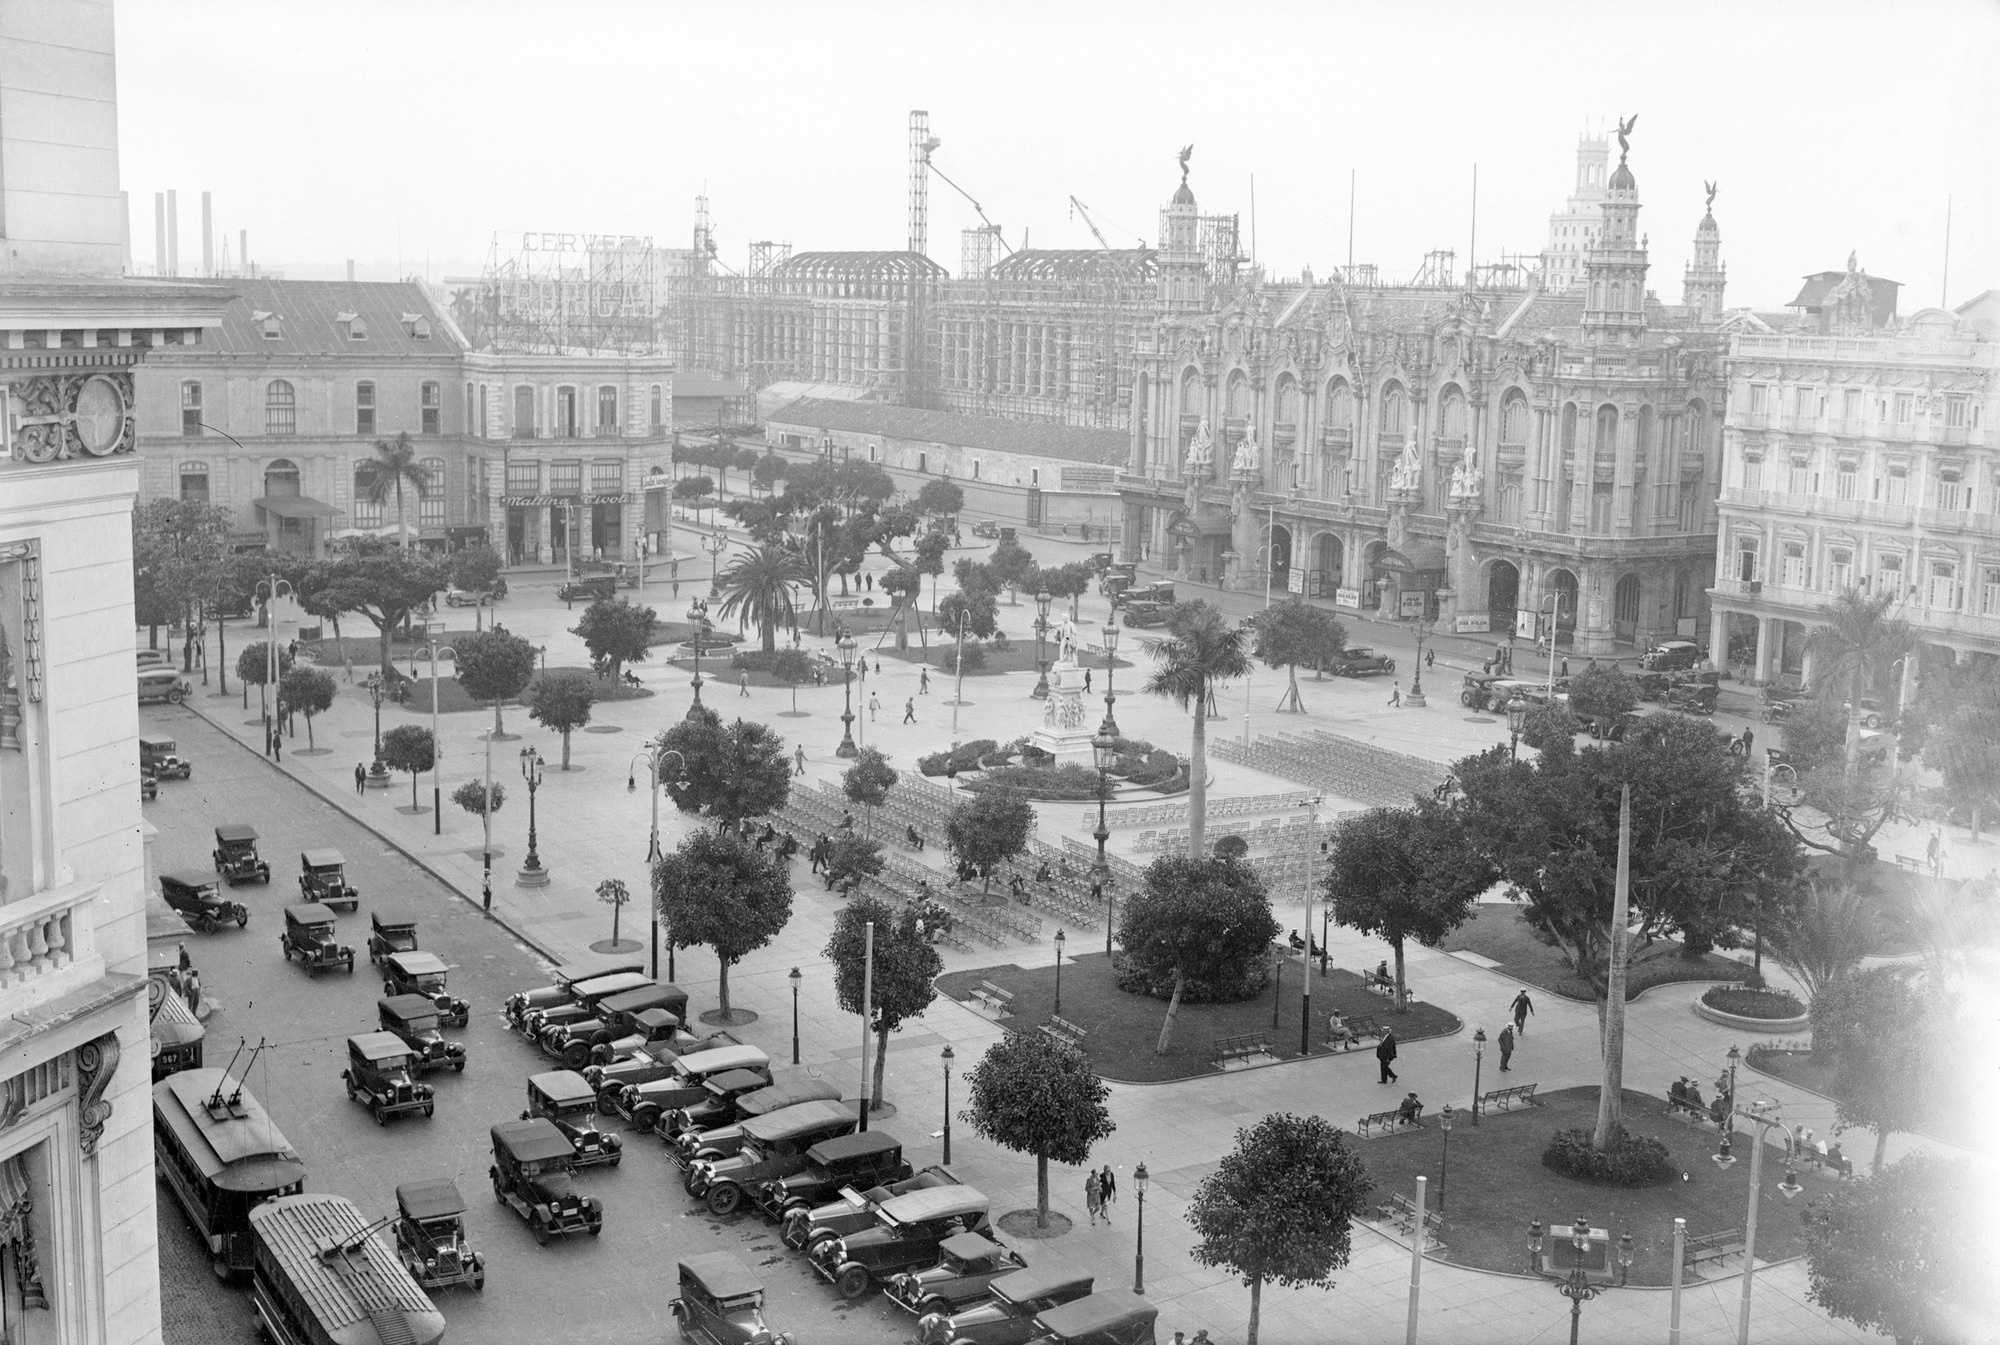 A view of Central Park in Havana, Cuba in 1928.